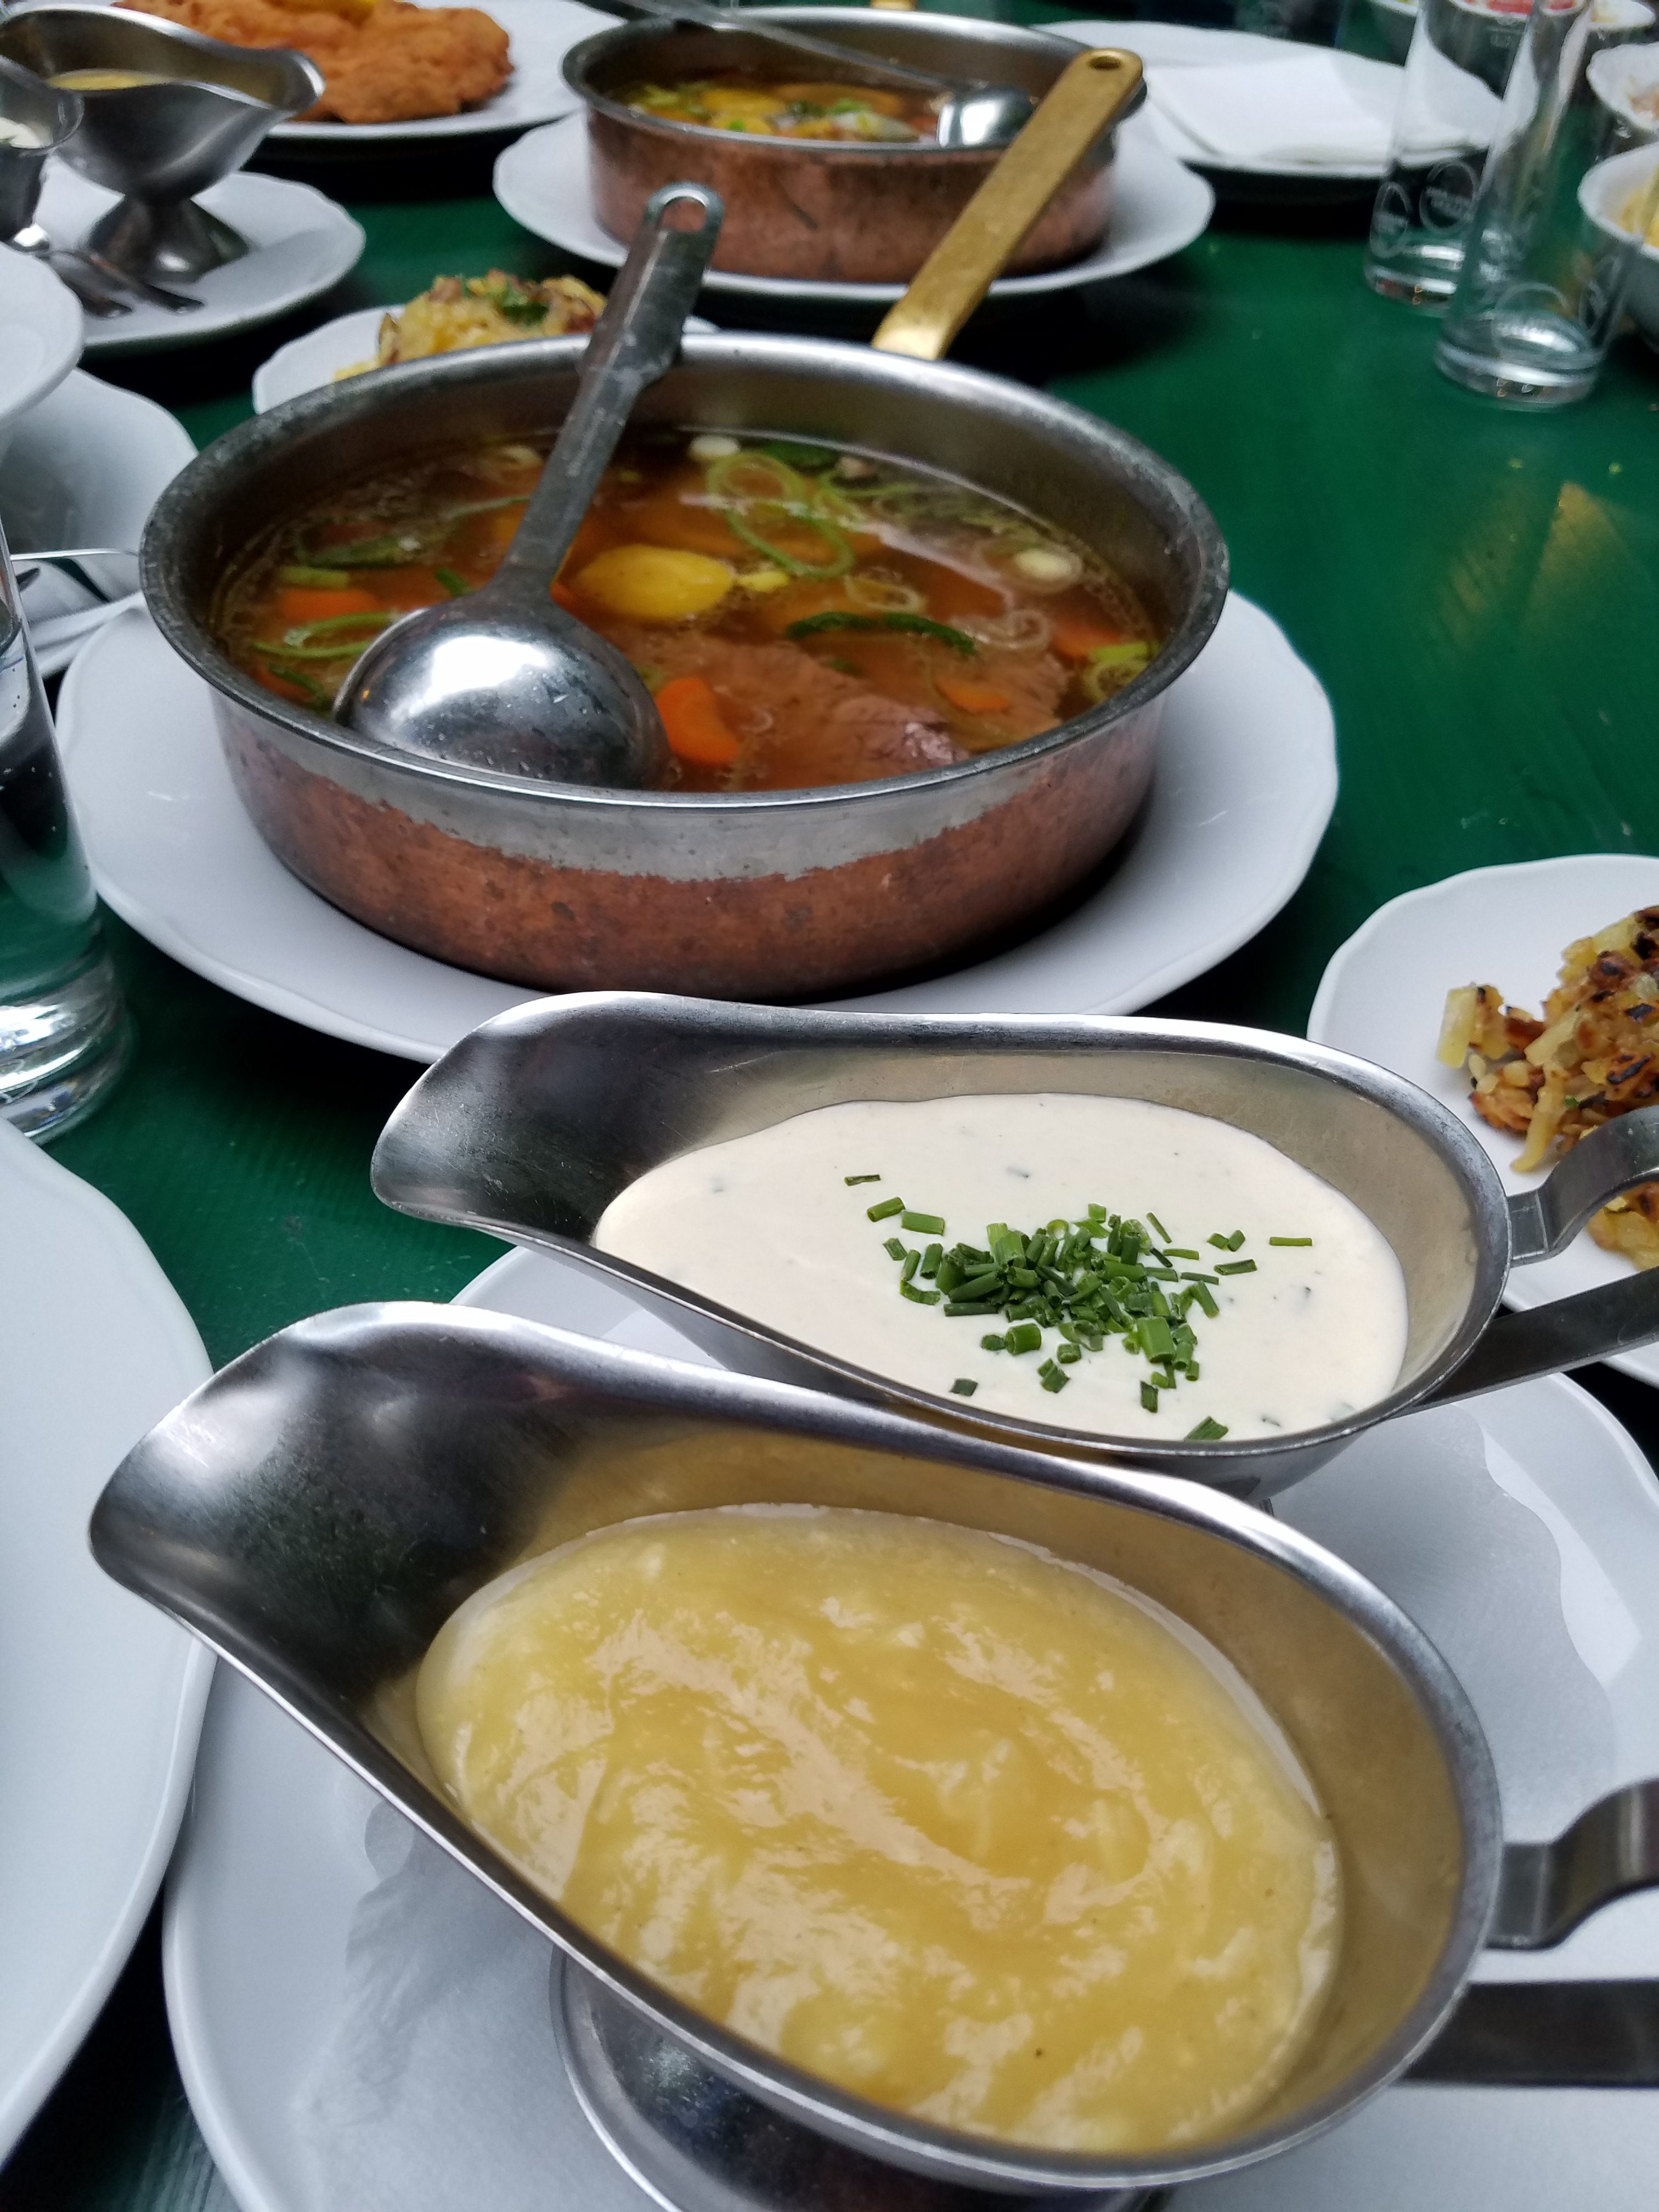 Austrian culinary specialty. A pot of vegetable broth with a spoon in it sits on a table next to two gravy boats filled with sauces. Beef or veal is typically cooked in the broth and then served in the pot with sauces on the side.